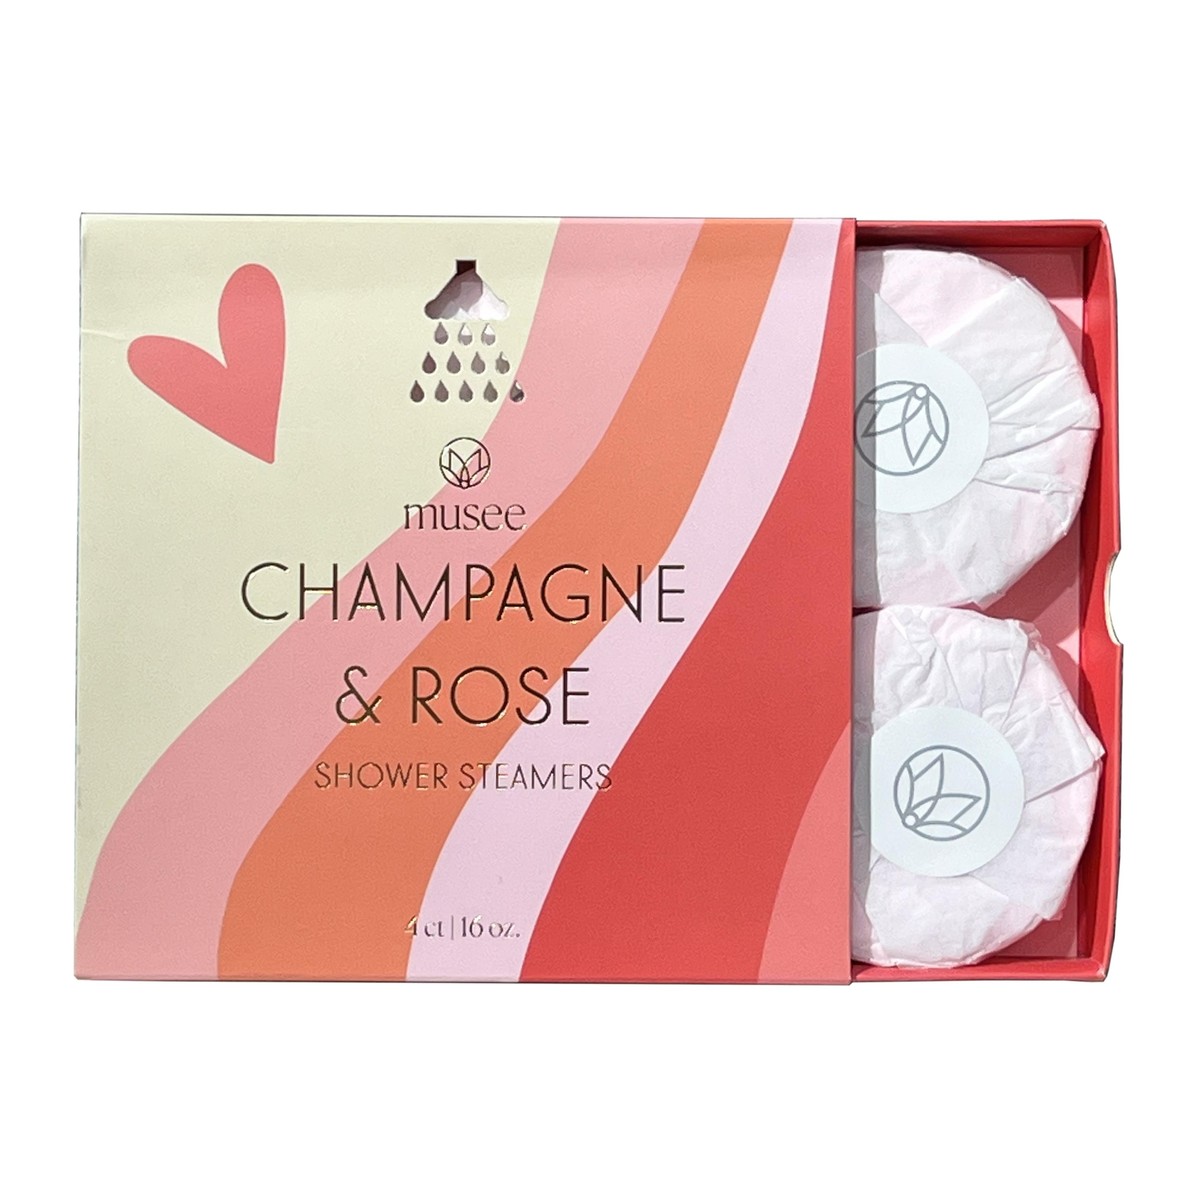  MUSEE Palets parfumés Champagne + Rose  